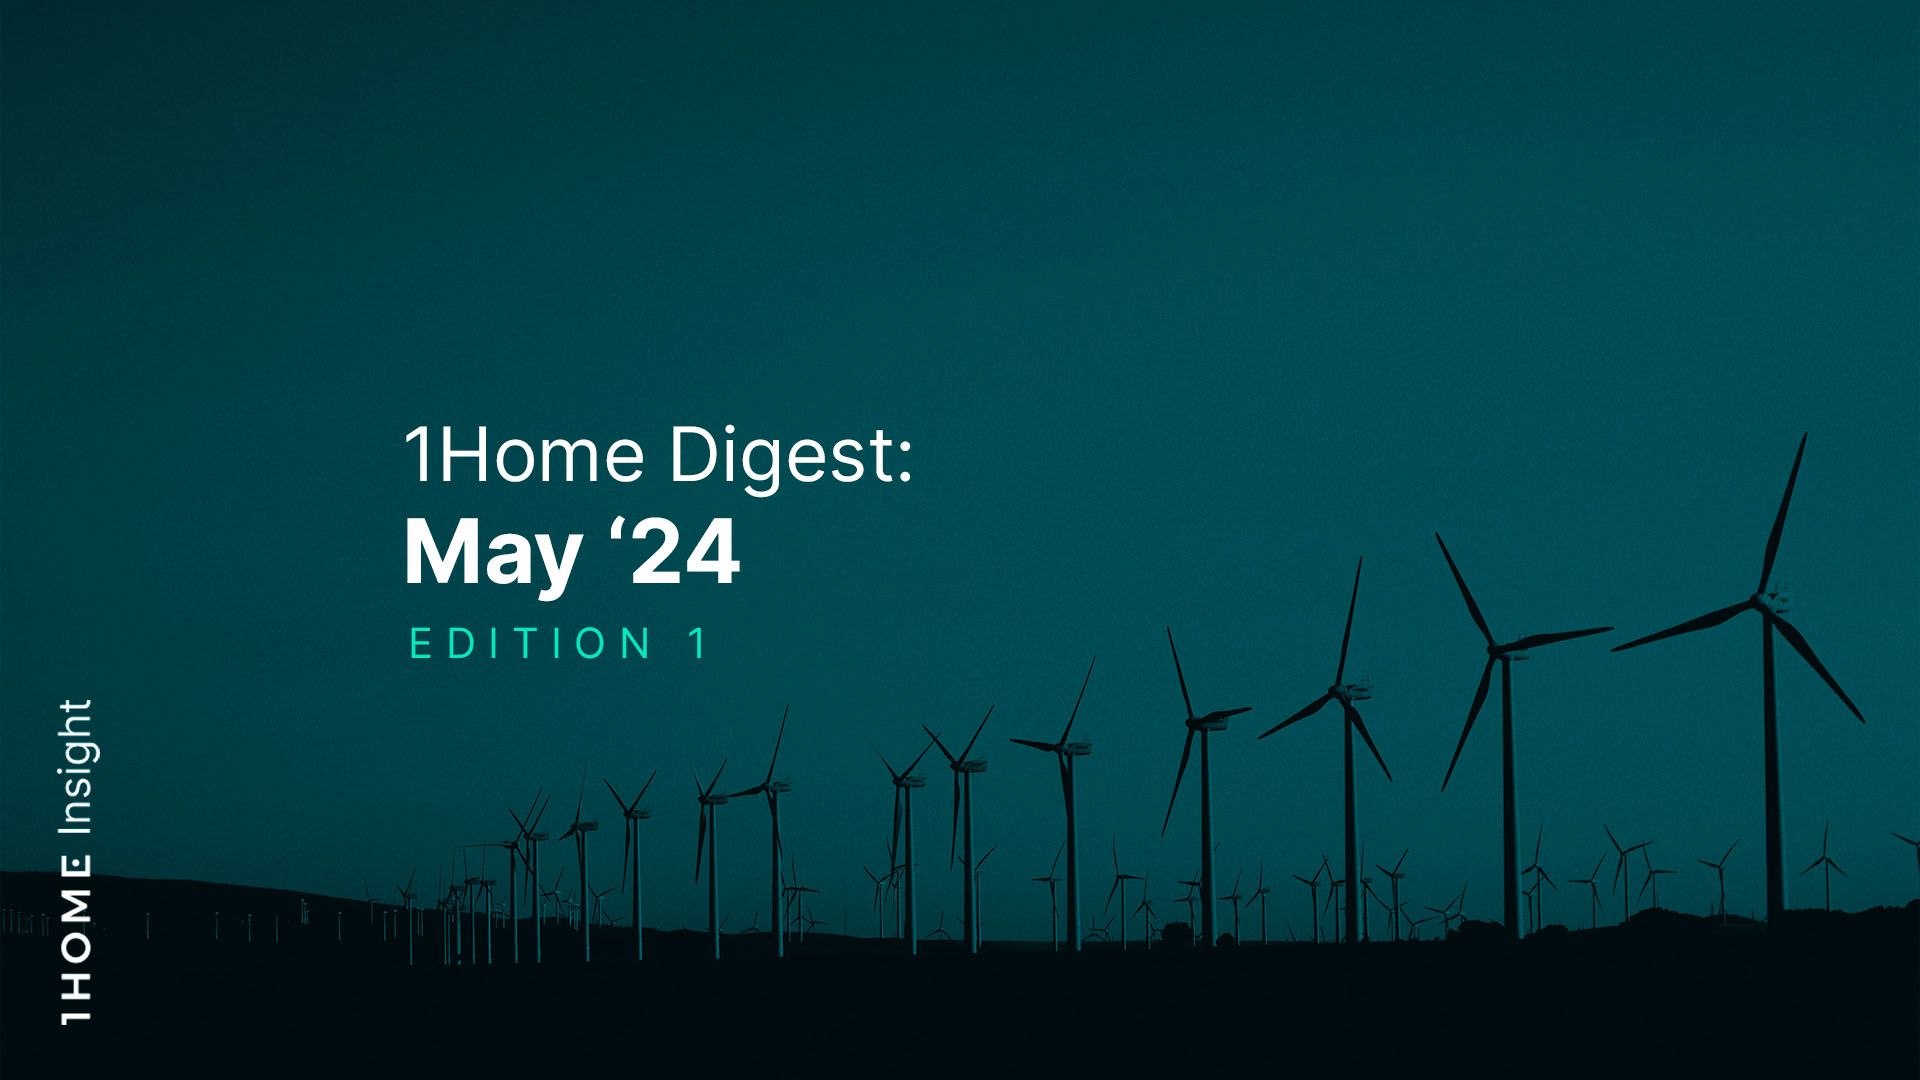 1Home Digest: May'24 Edition 1